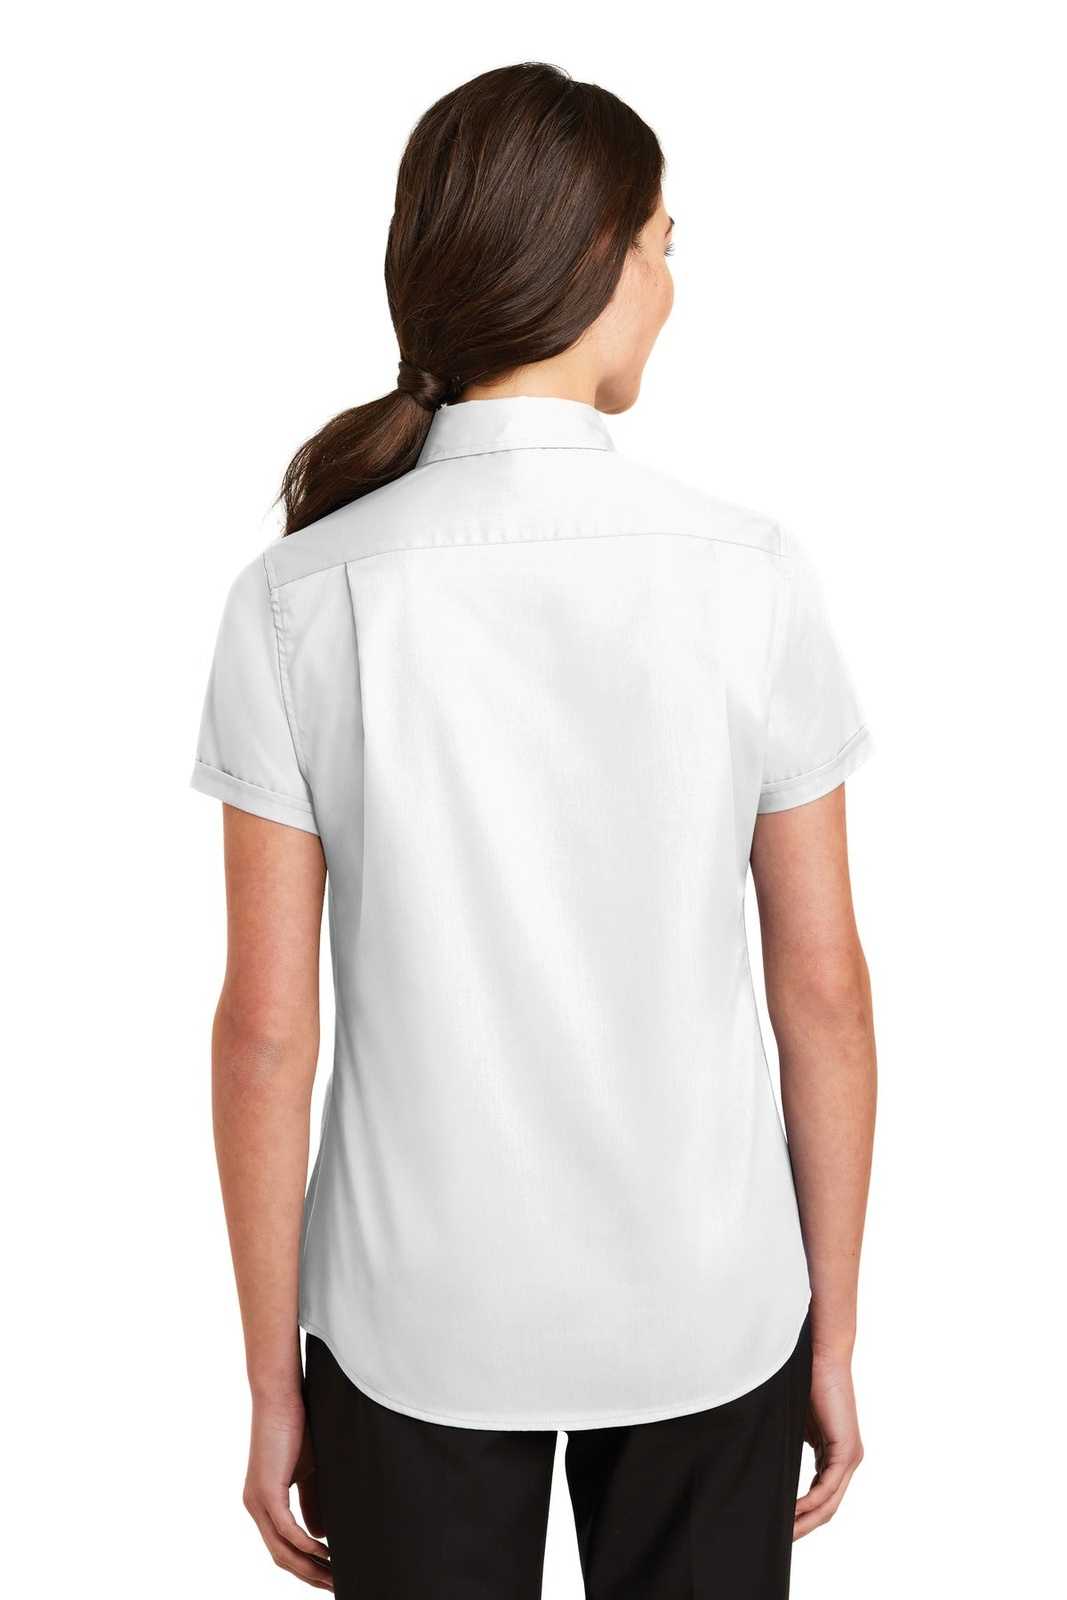 Port Authority L664 Ladies Short Sleeve Superpro Twill Shirt - White - HIT a Double - 1